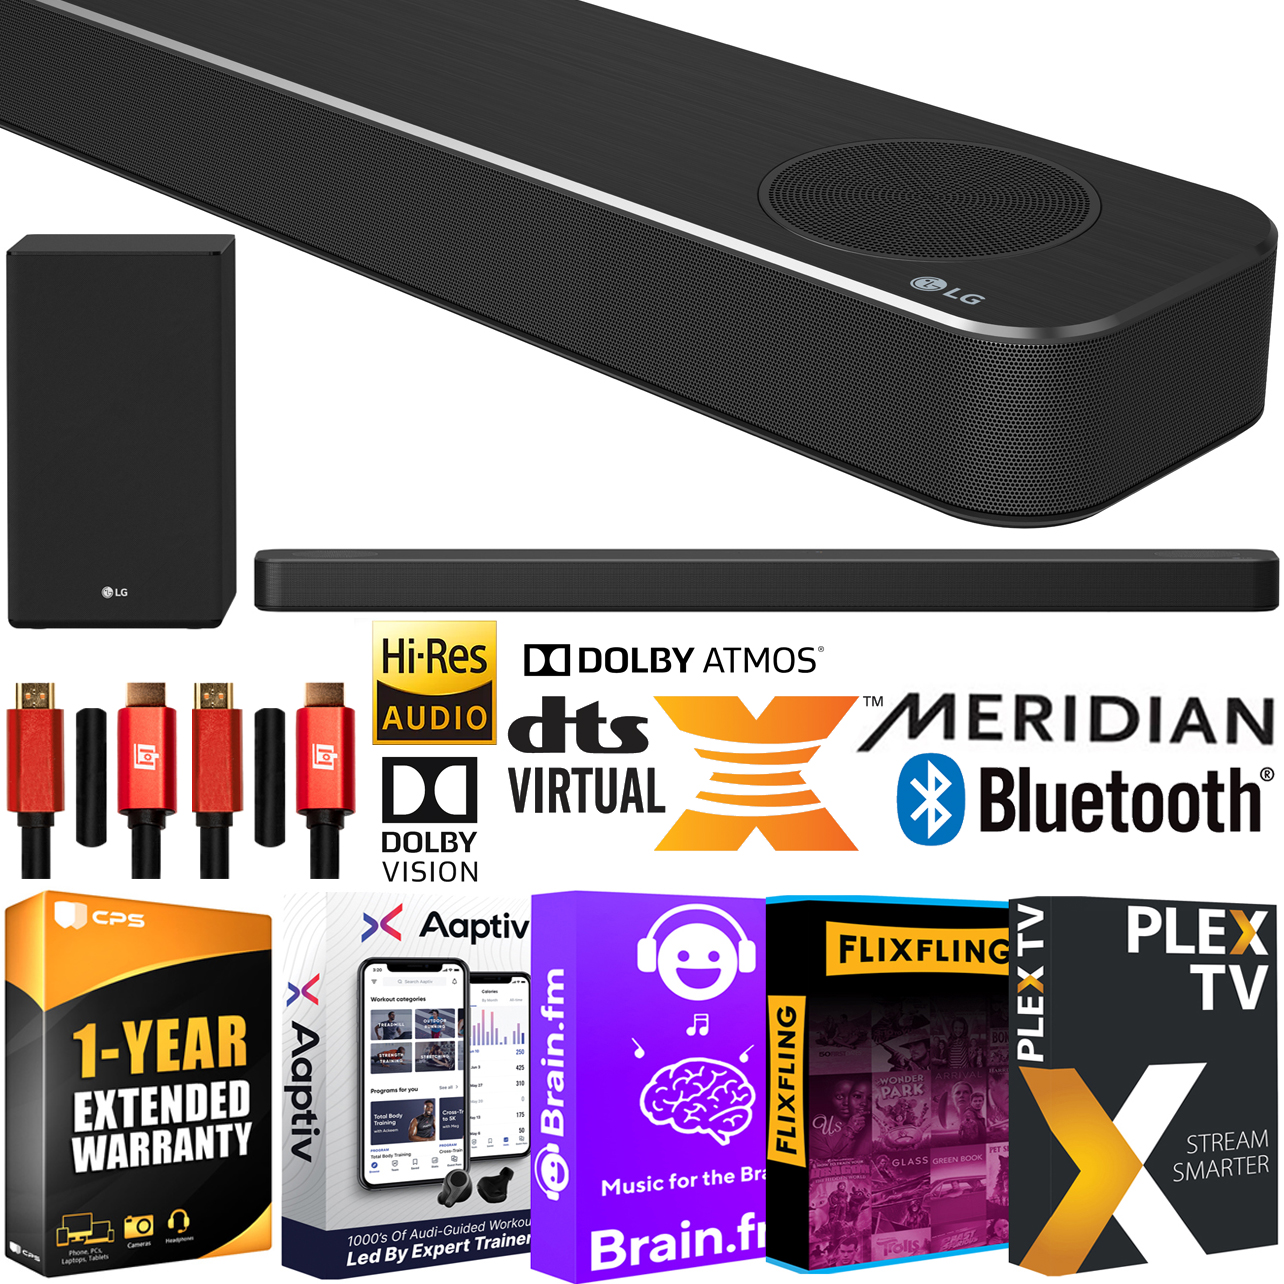 LG SN8YG 3.1.2ch Sound Bar w/ Meridian, Dolby Atmos, DTS:X 3D Surround Sound + Wireless Subwoofer Bundle with 2x Deco Gear HDMI Cable + 1 Year Extended Coverage + Streaming Entertainment Software Kit - image 1 of 10